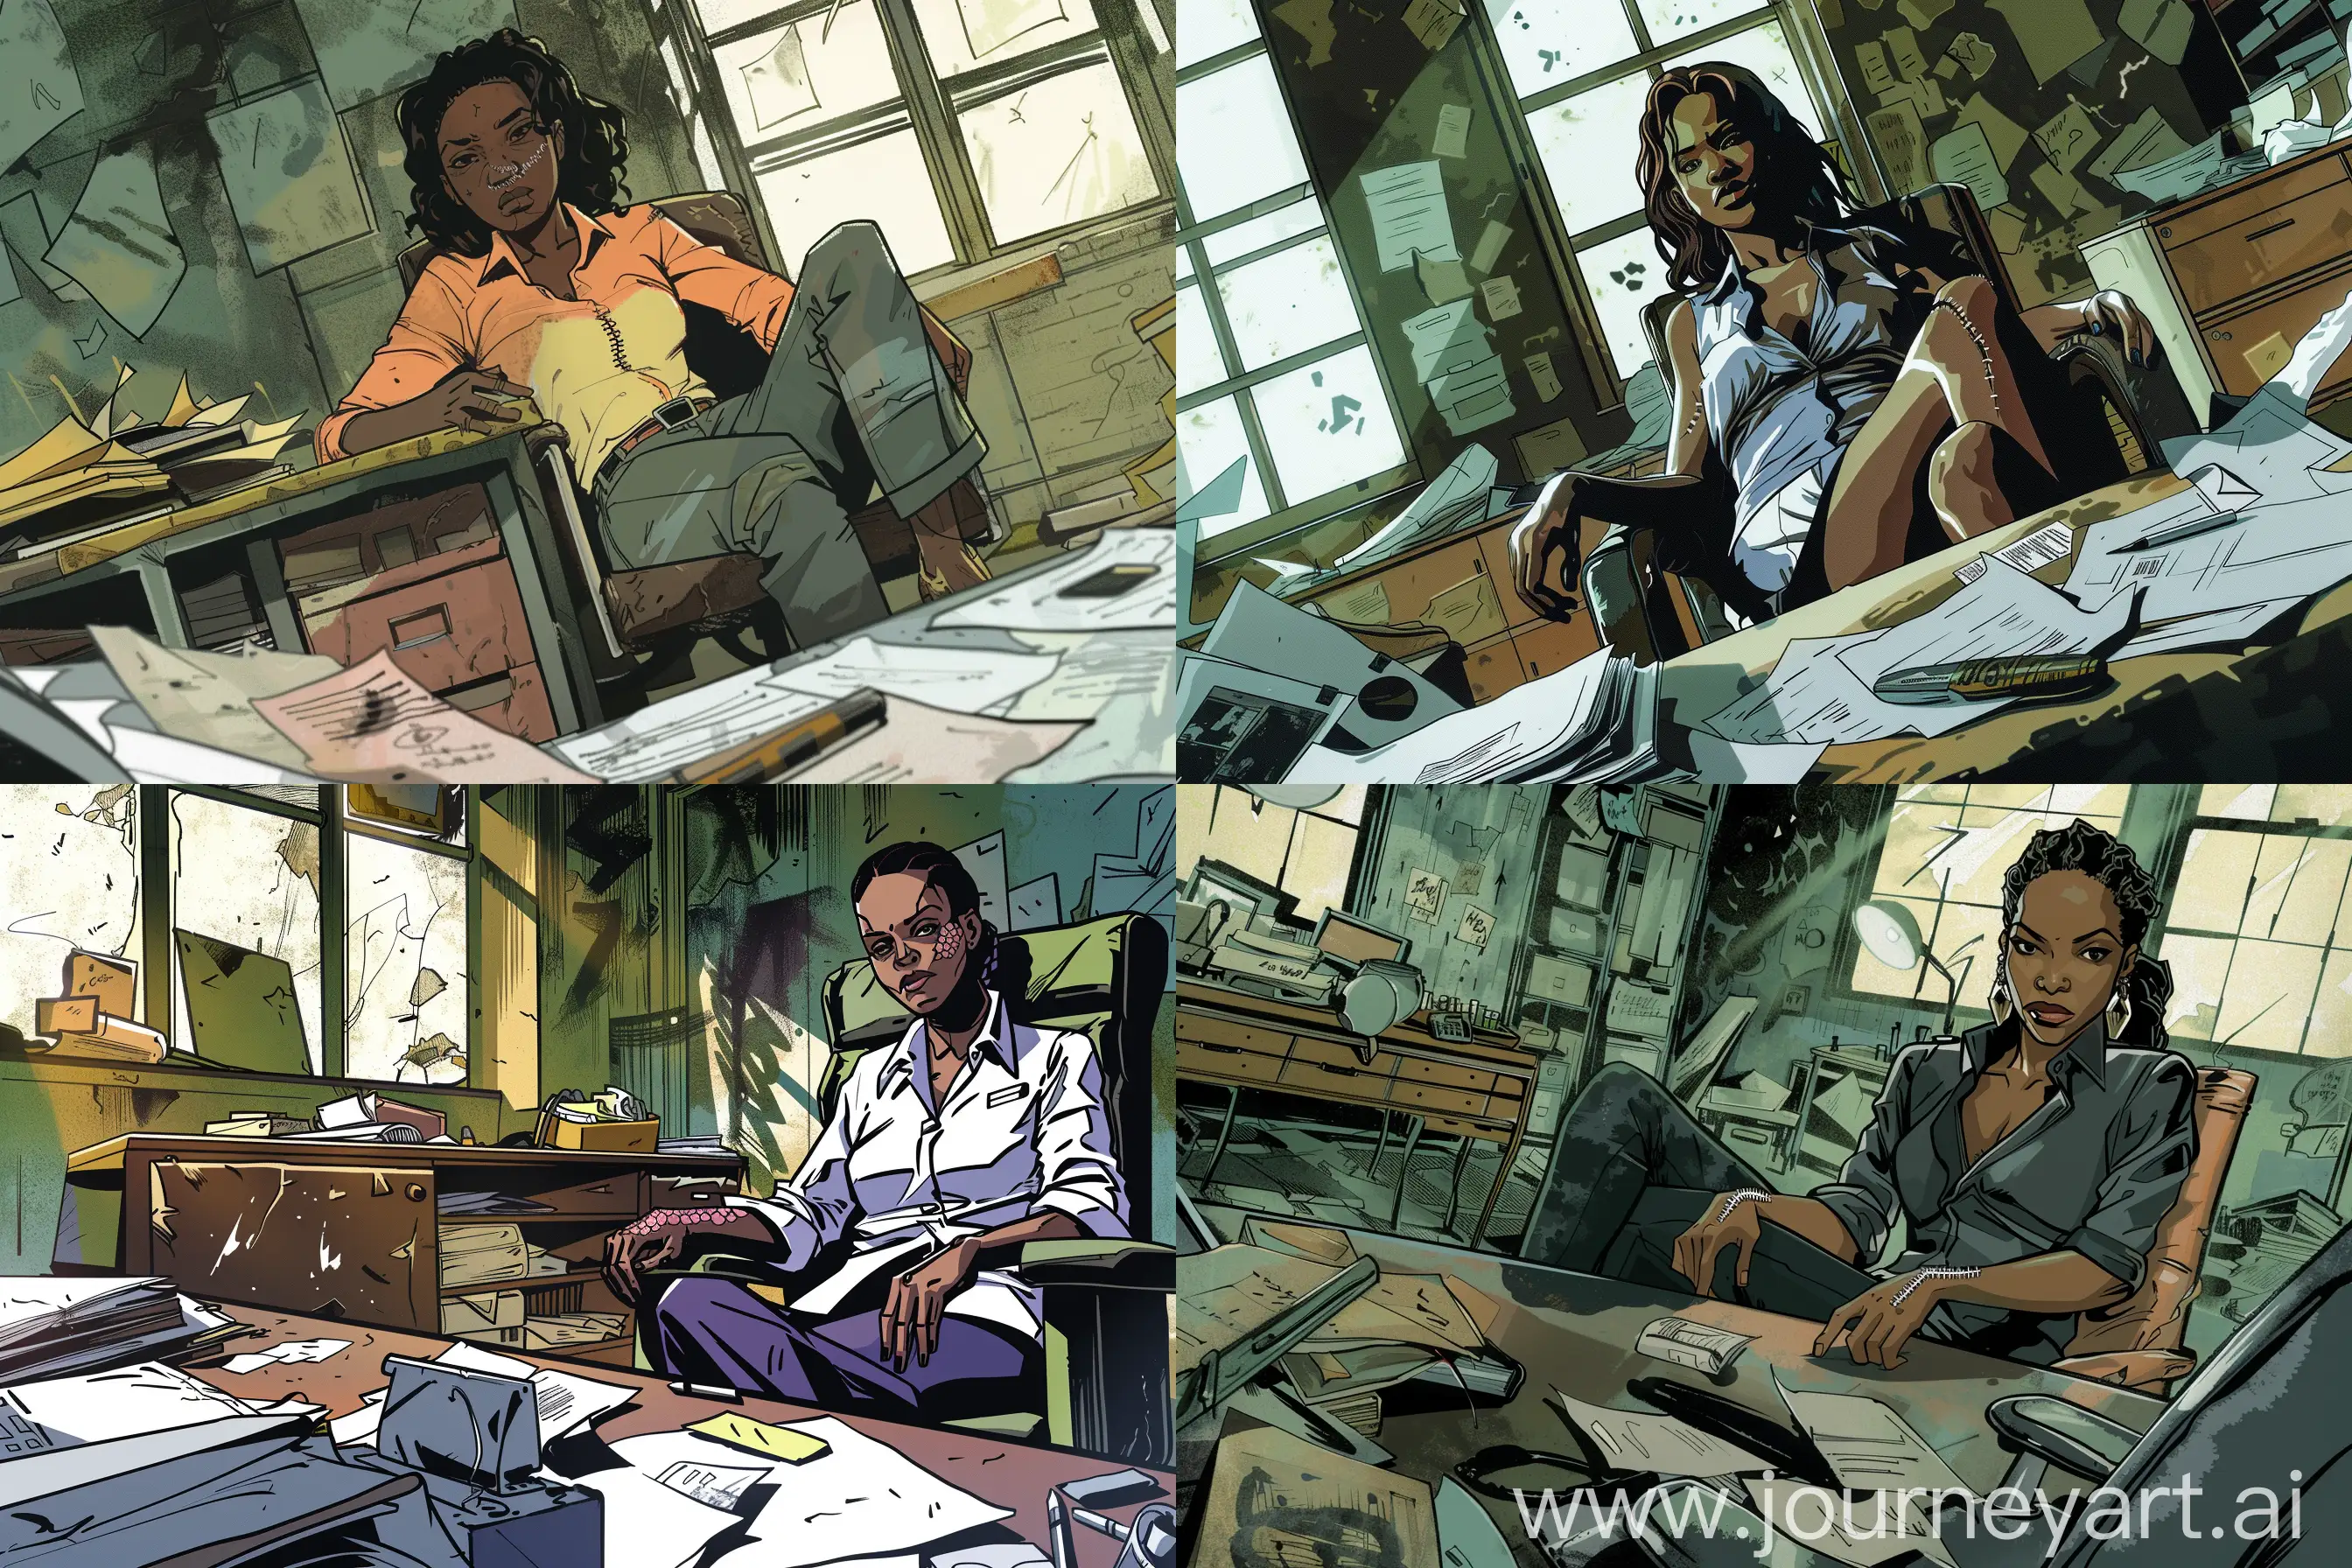 Resilient-Black-Businesswoman-in-Dilapidated-Office-Storytelling-Scene-with-Papers-and-Objects